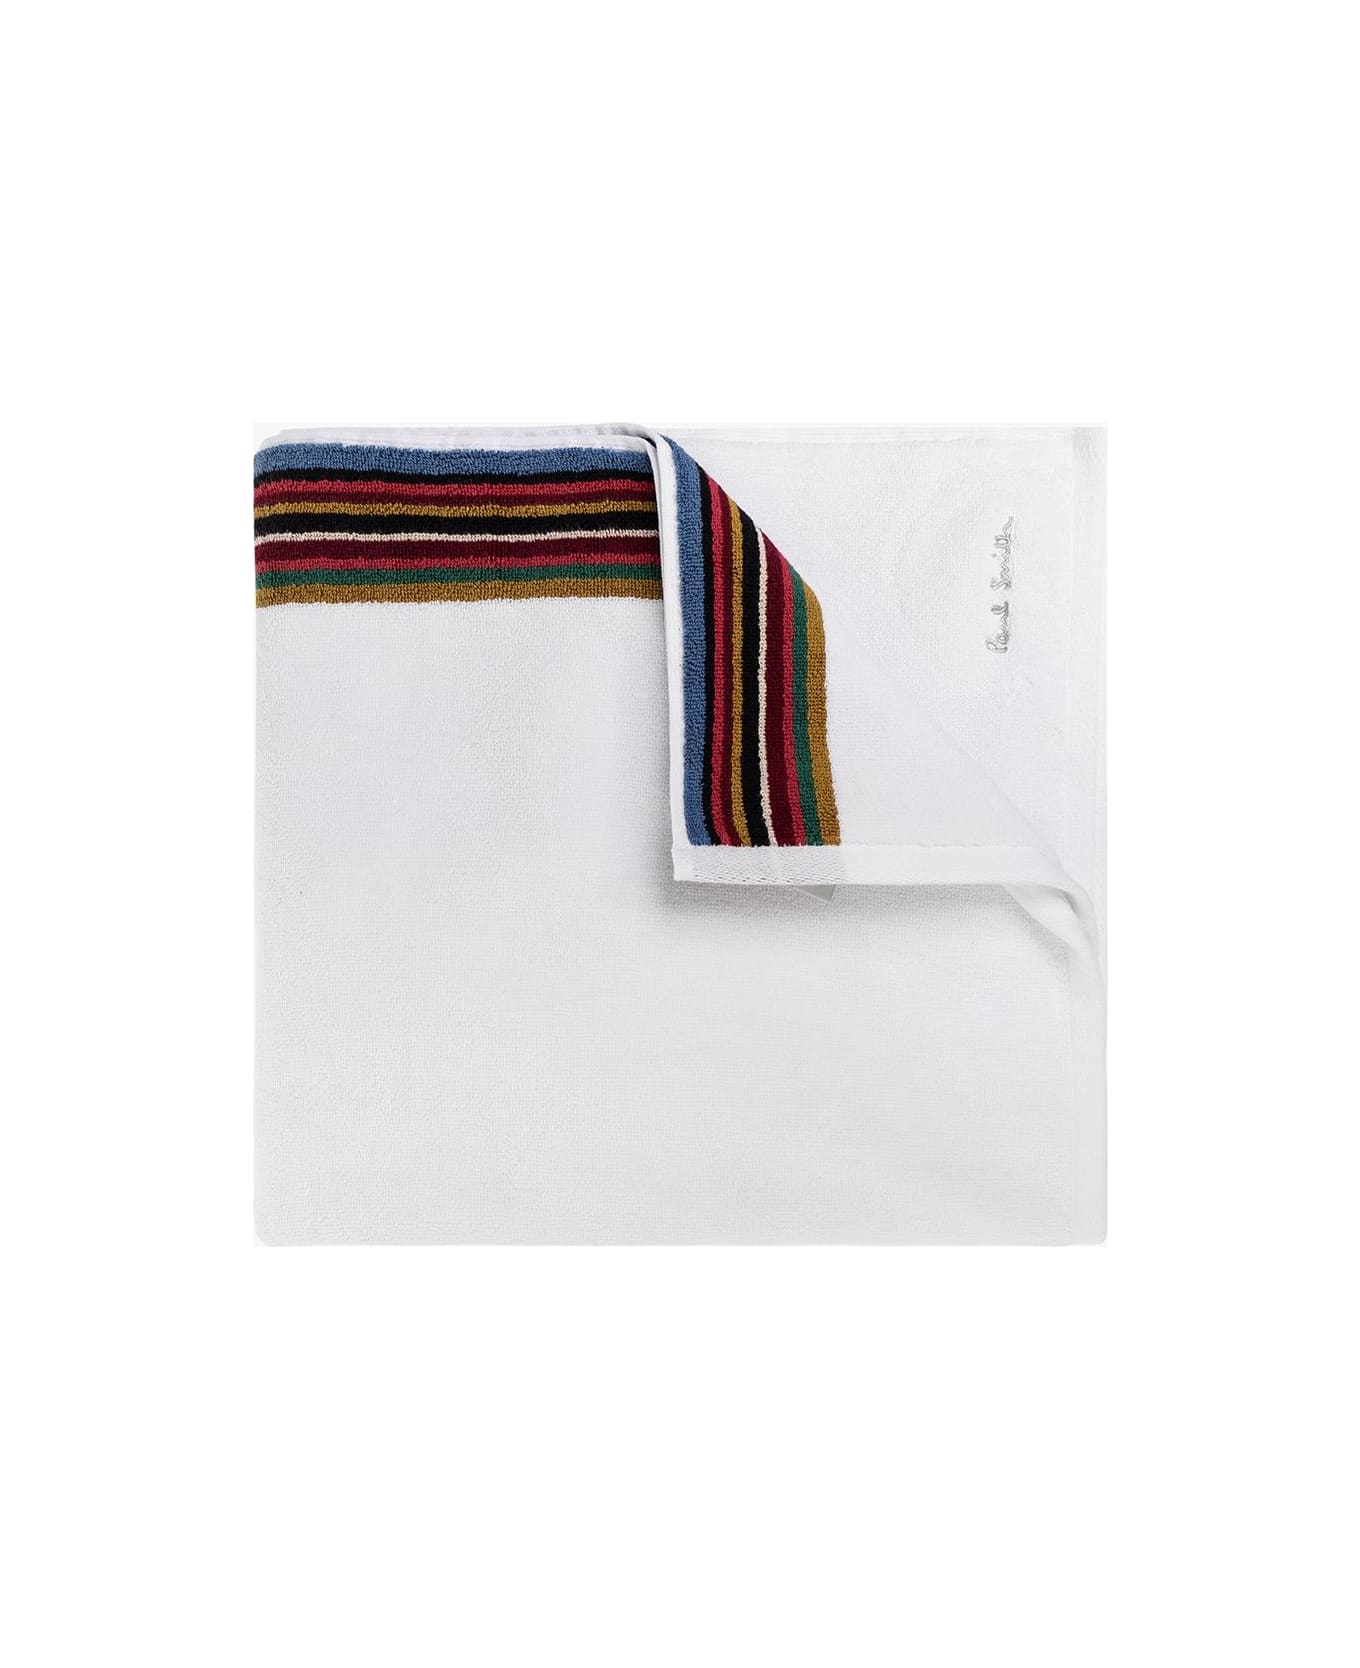 Paul Smith Set Of 3 Towels - WHITE タオル